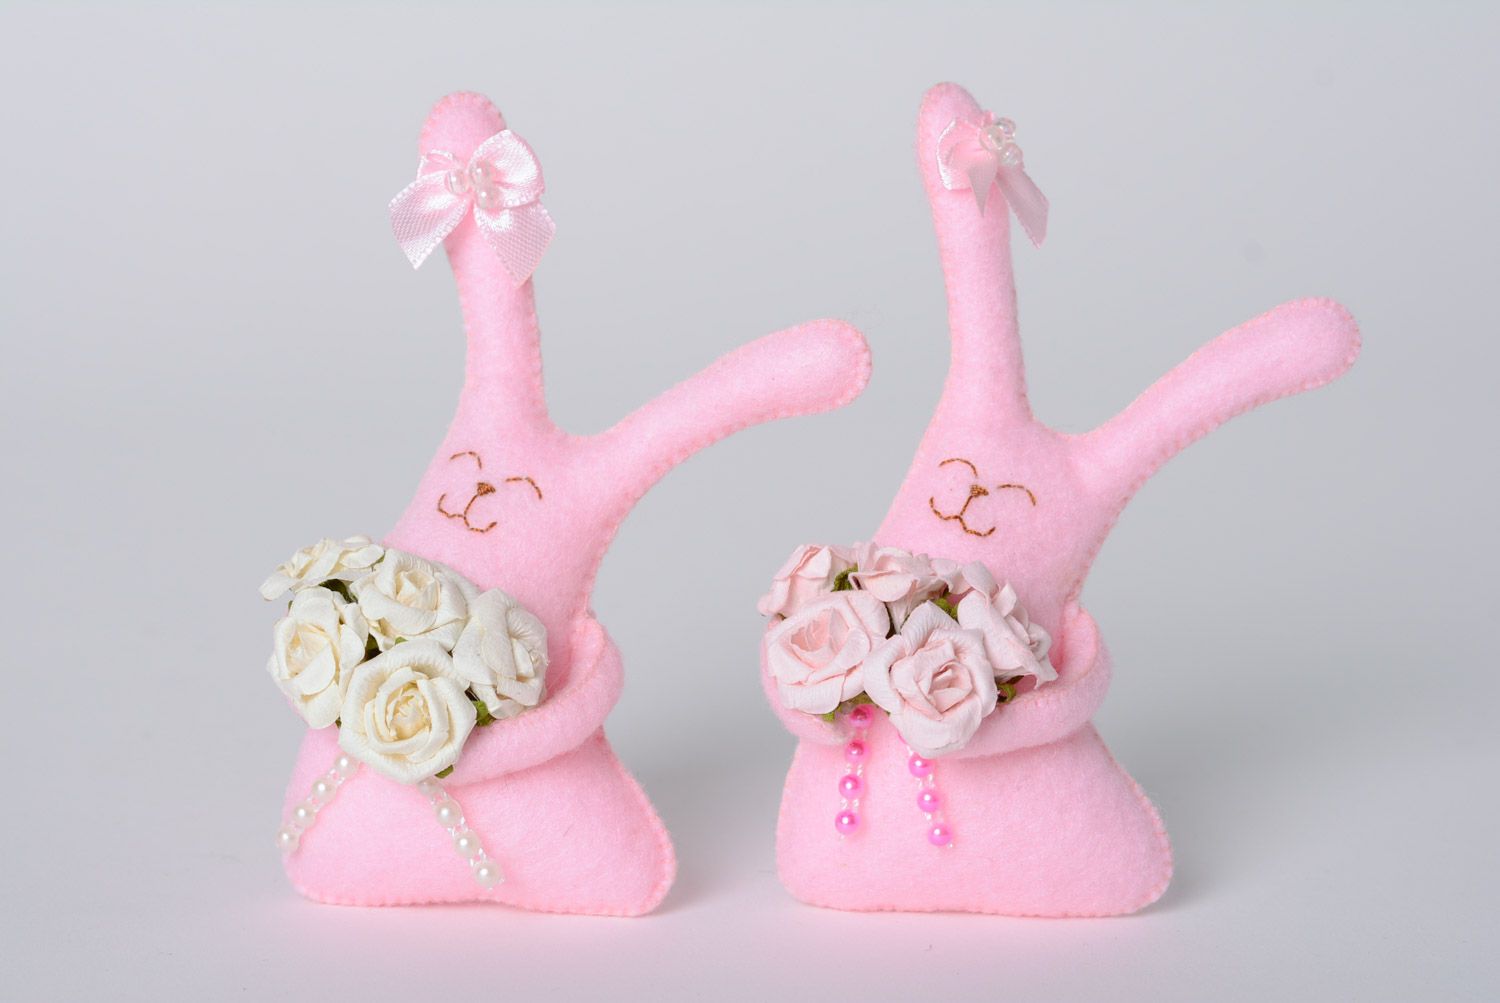 Handmade designer small soft toy bunnies in pink colors set of 2 pieces gift for baby photo 1